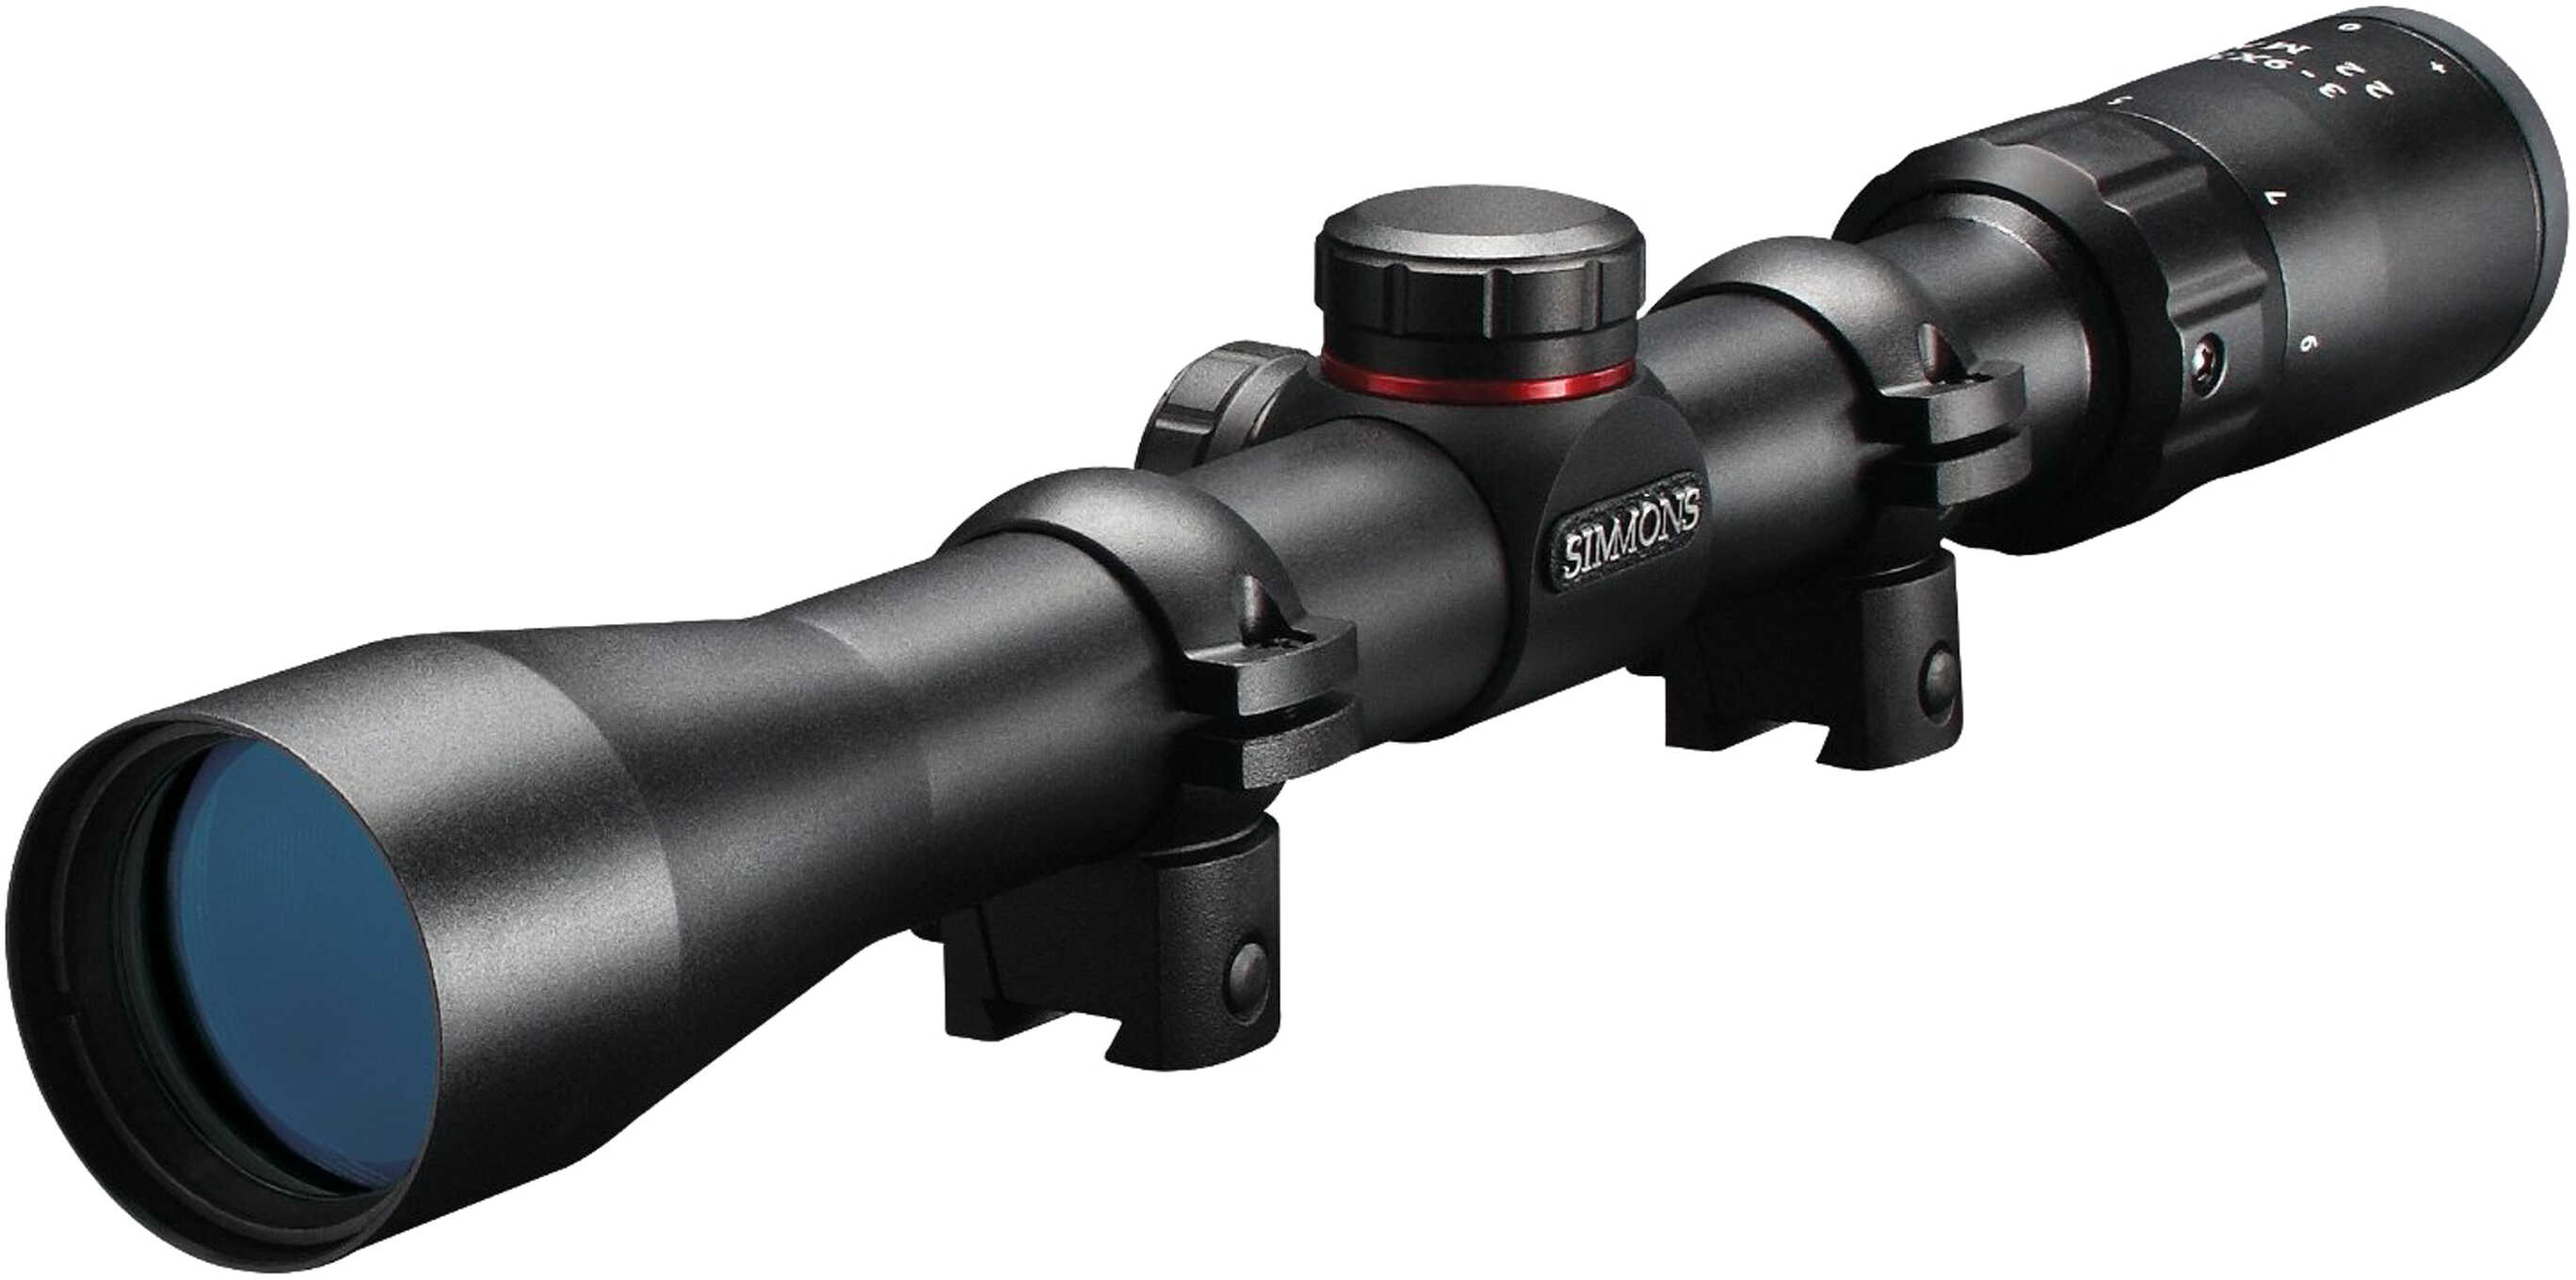 Simmons .22 Mag Rimfire Rifle Scope With Rings - 3-9x32mm Truplex 31.4-10.5 3.75" Matte